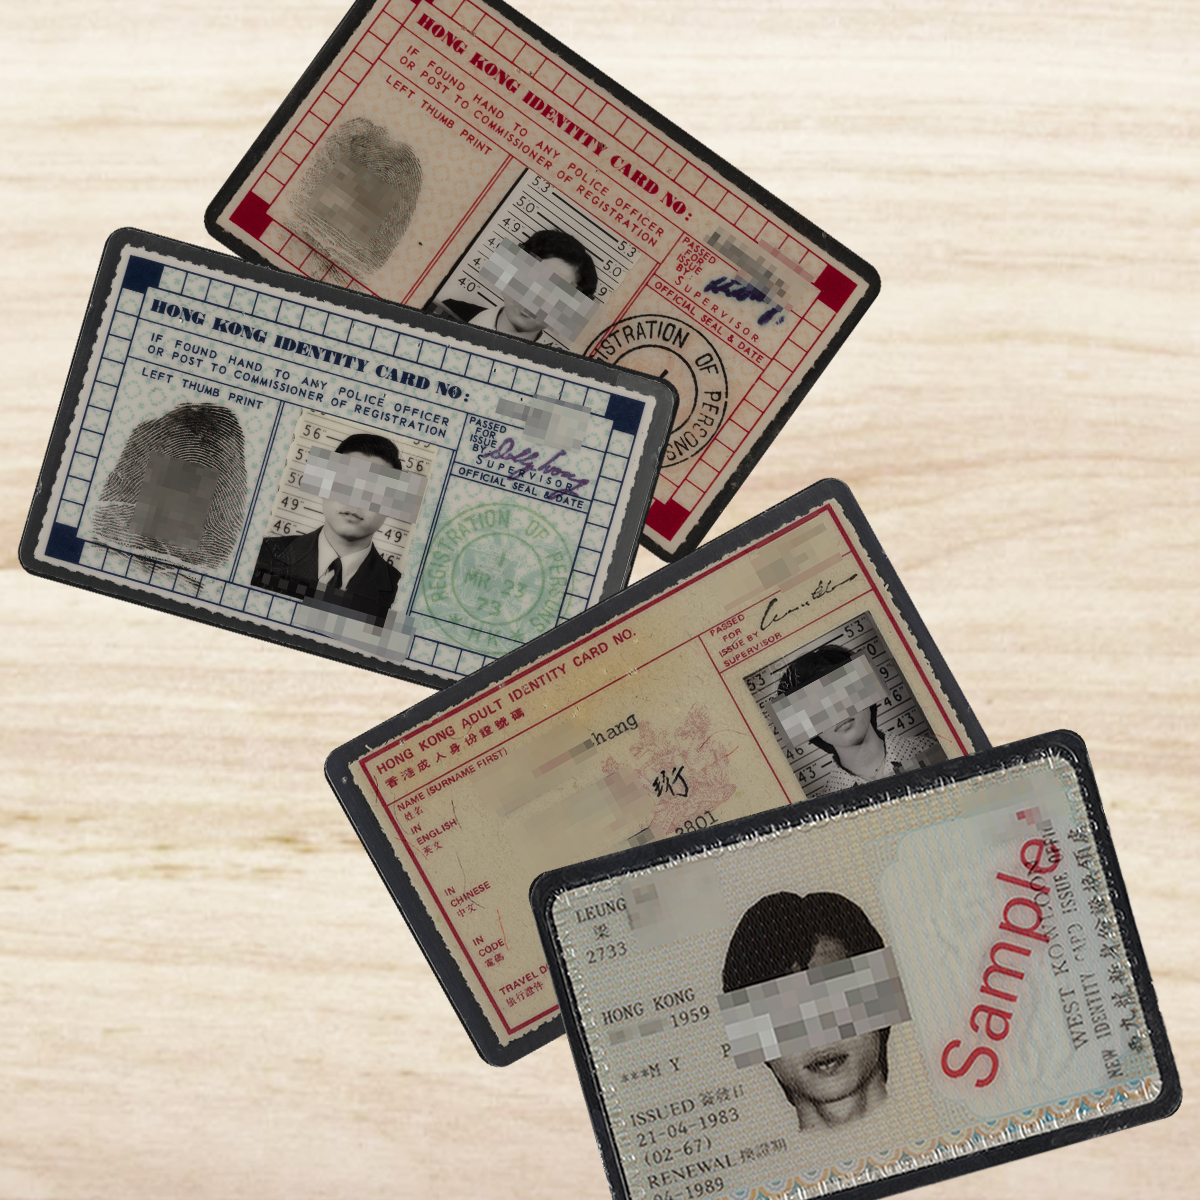 The Designs of ID Cards